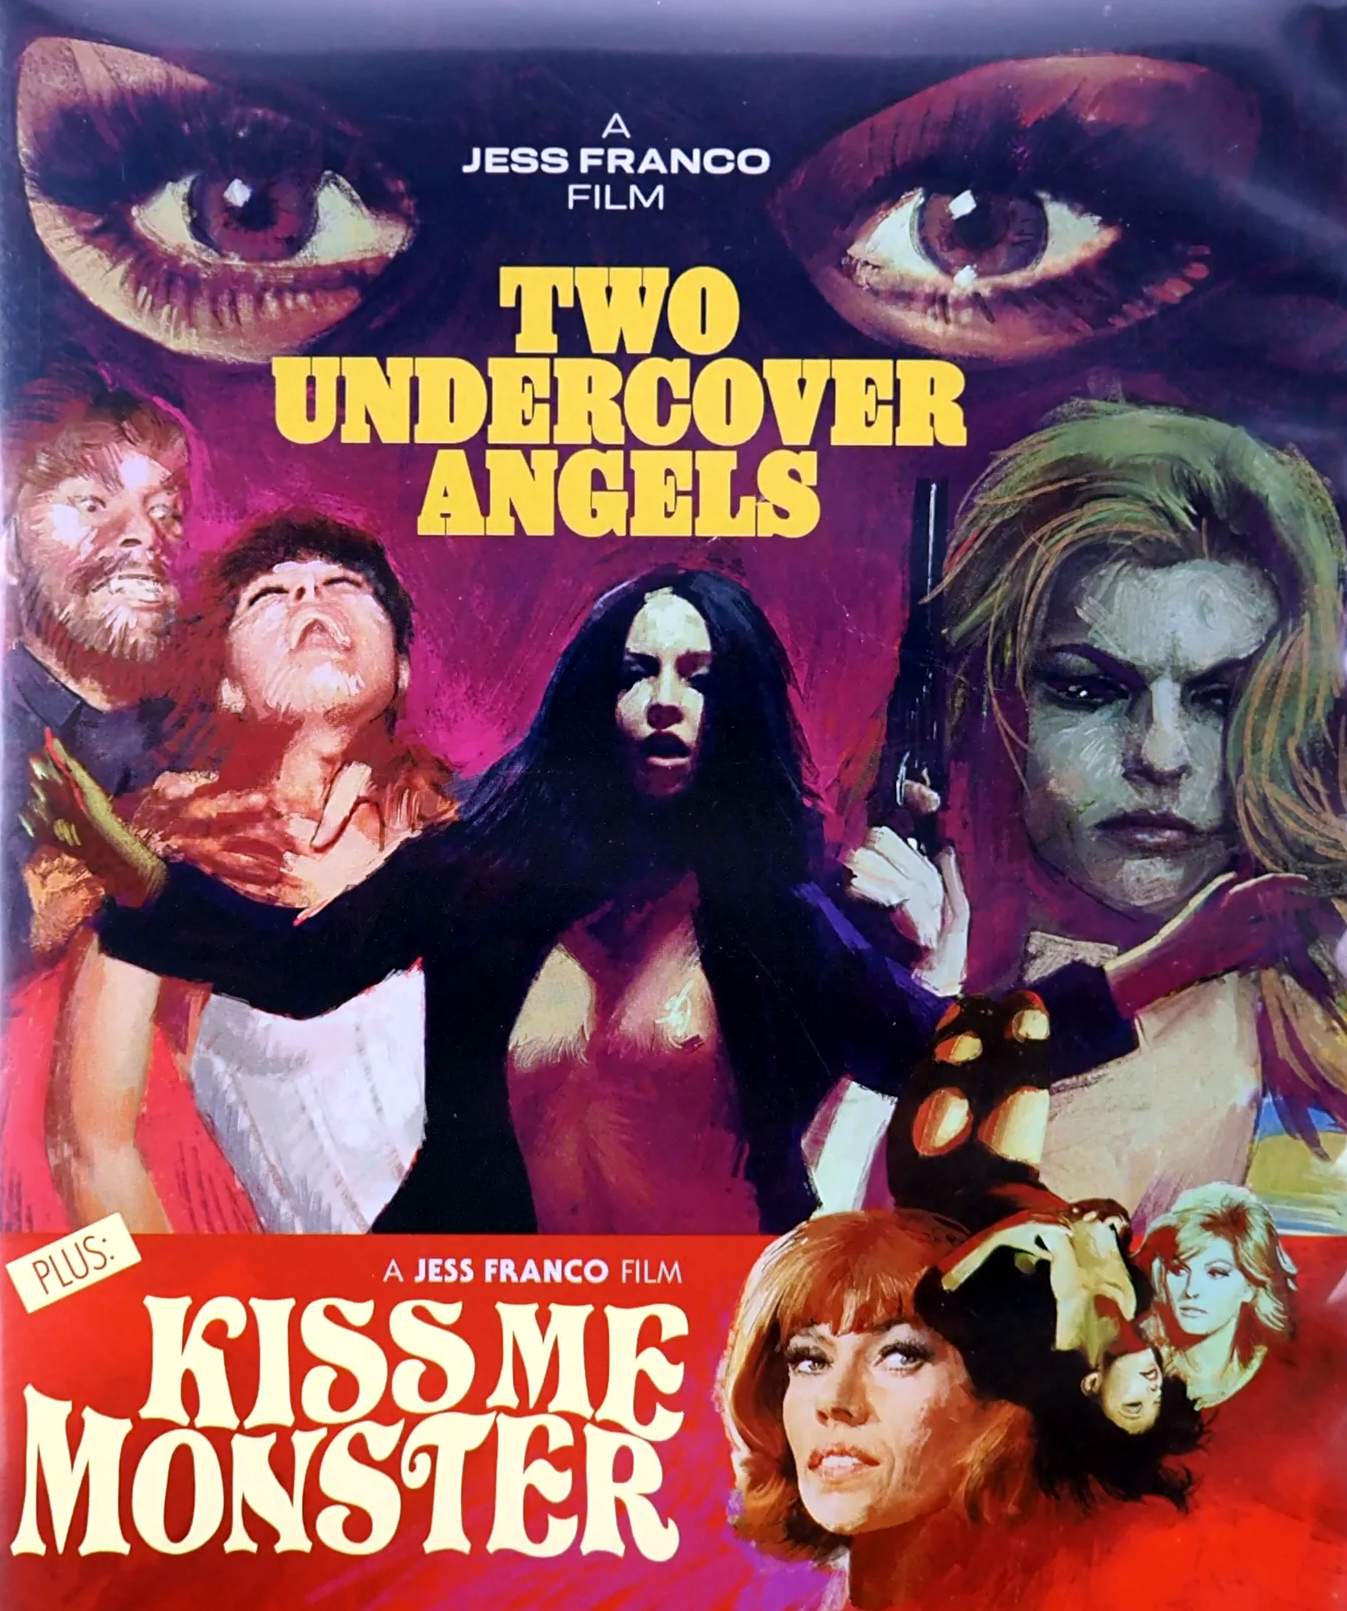 TWO UNDERCOVER ANGELS / KISS ME MONSTER BLU-RAY